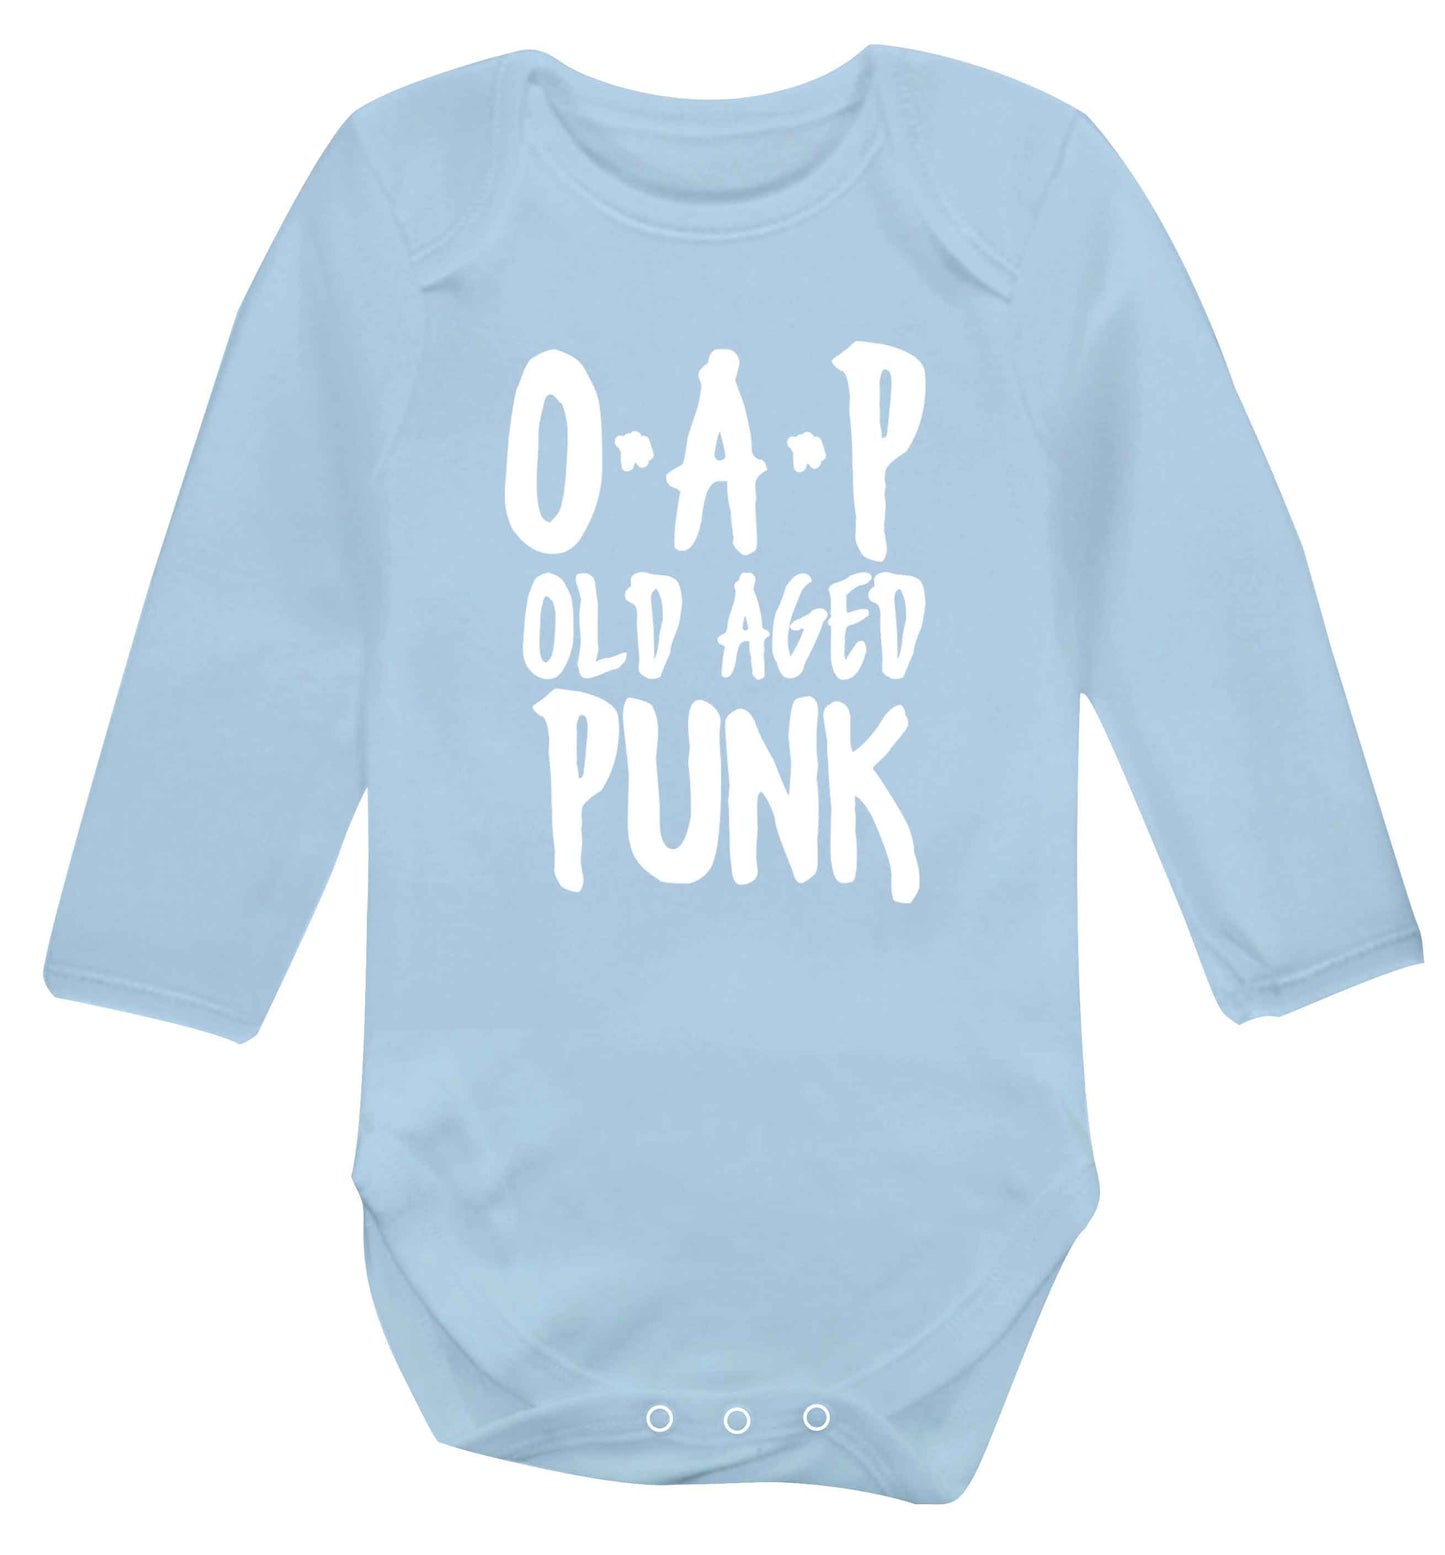 O.A.P Old Age Punk Baby Vest long sleeved pale blue 6-12 months